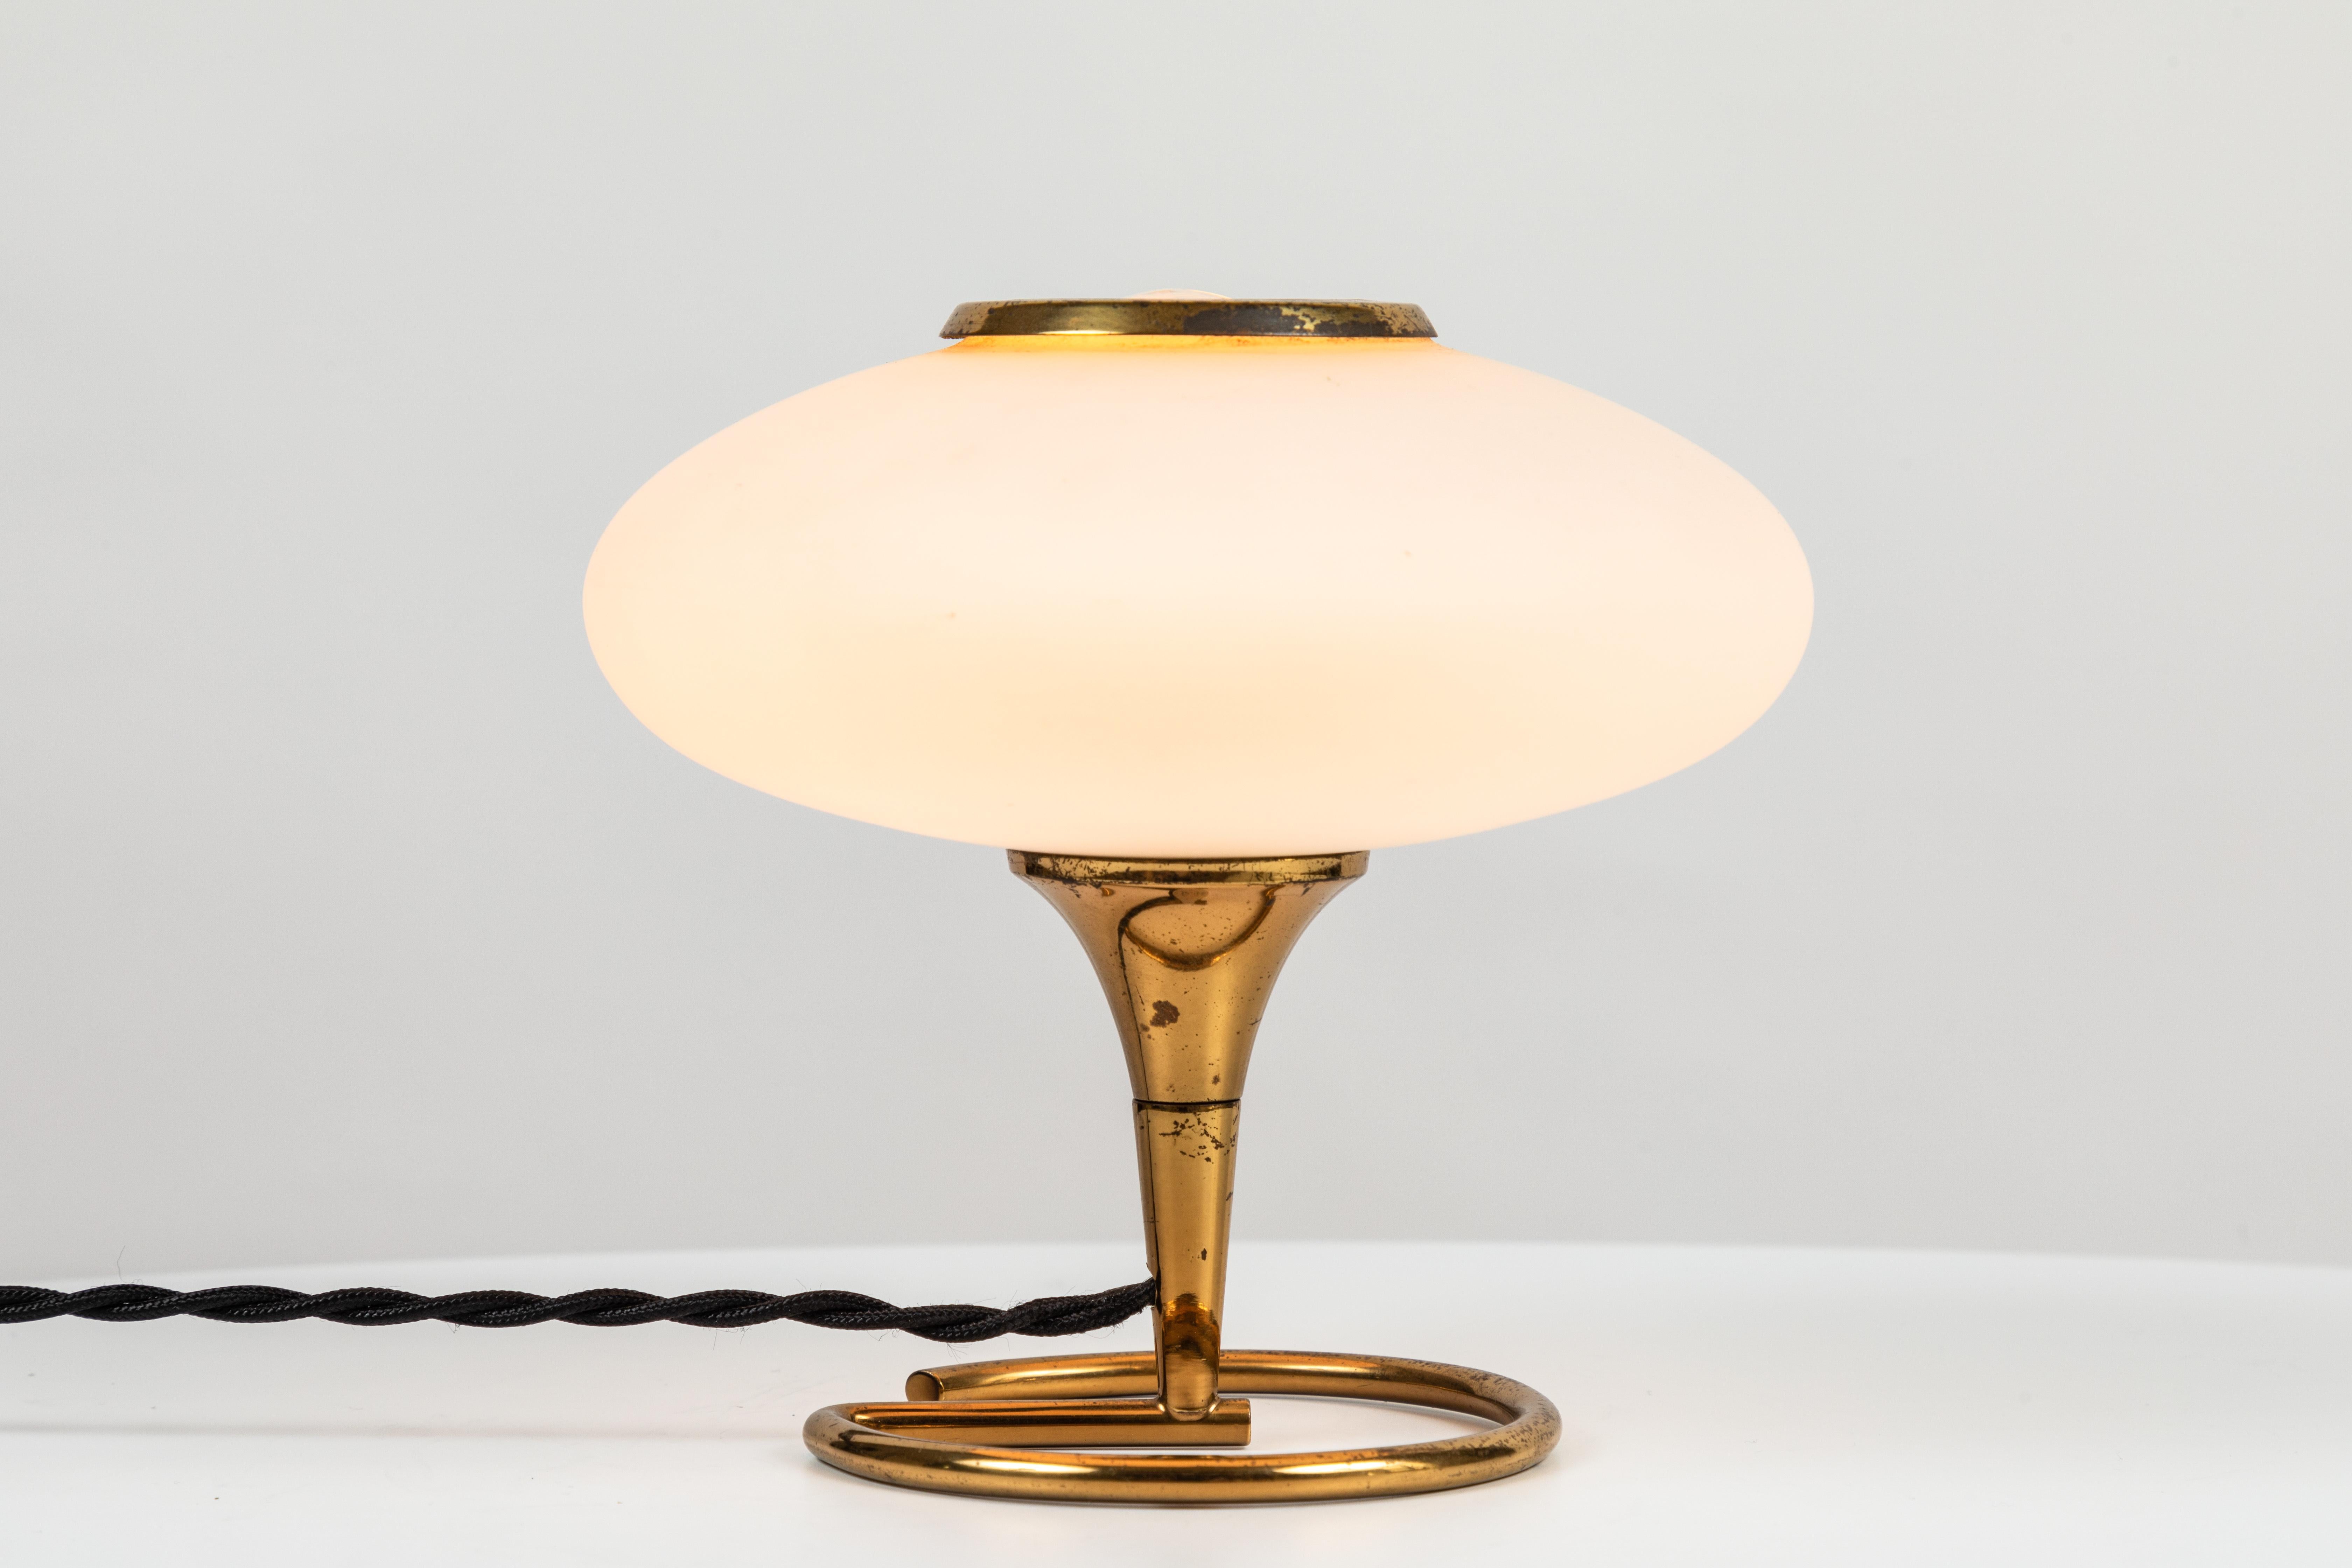 1960s Italian brass and glass table lamp attributed to Stilnovo. A delicate and whimsical table lamp executed in opaline glass and brass. A quintessentially midcentury Italian design reflecting the highest levels of materials, craftsmanship and